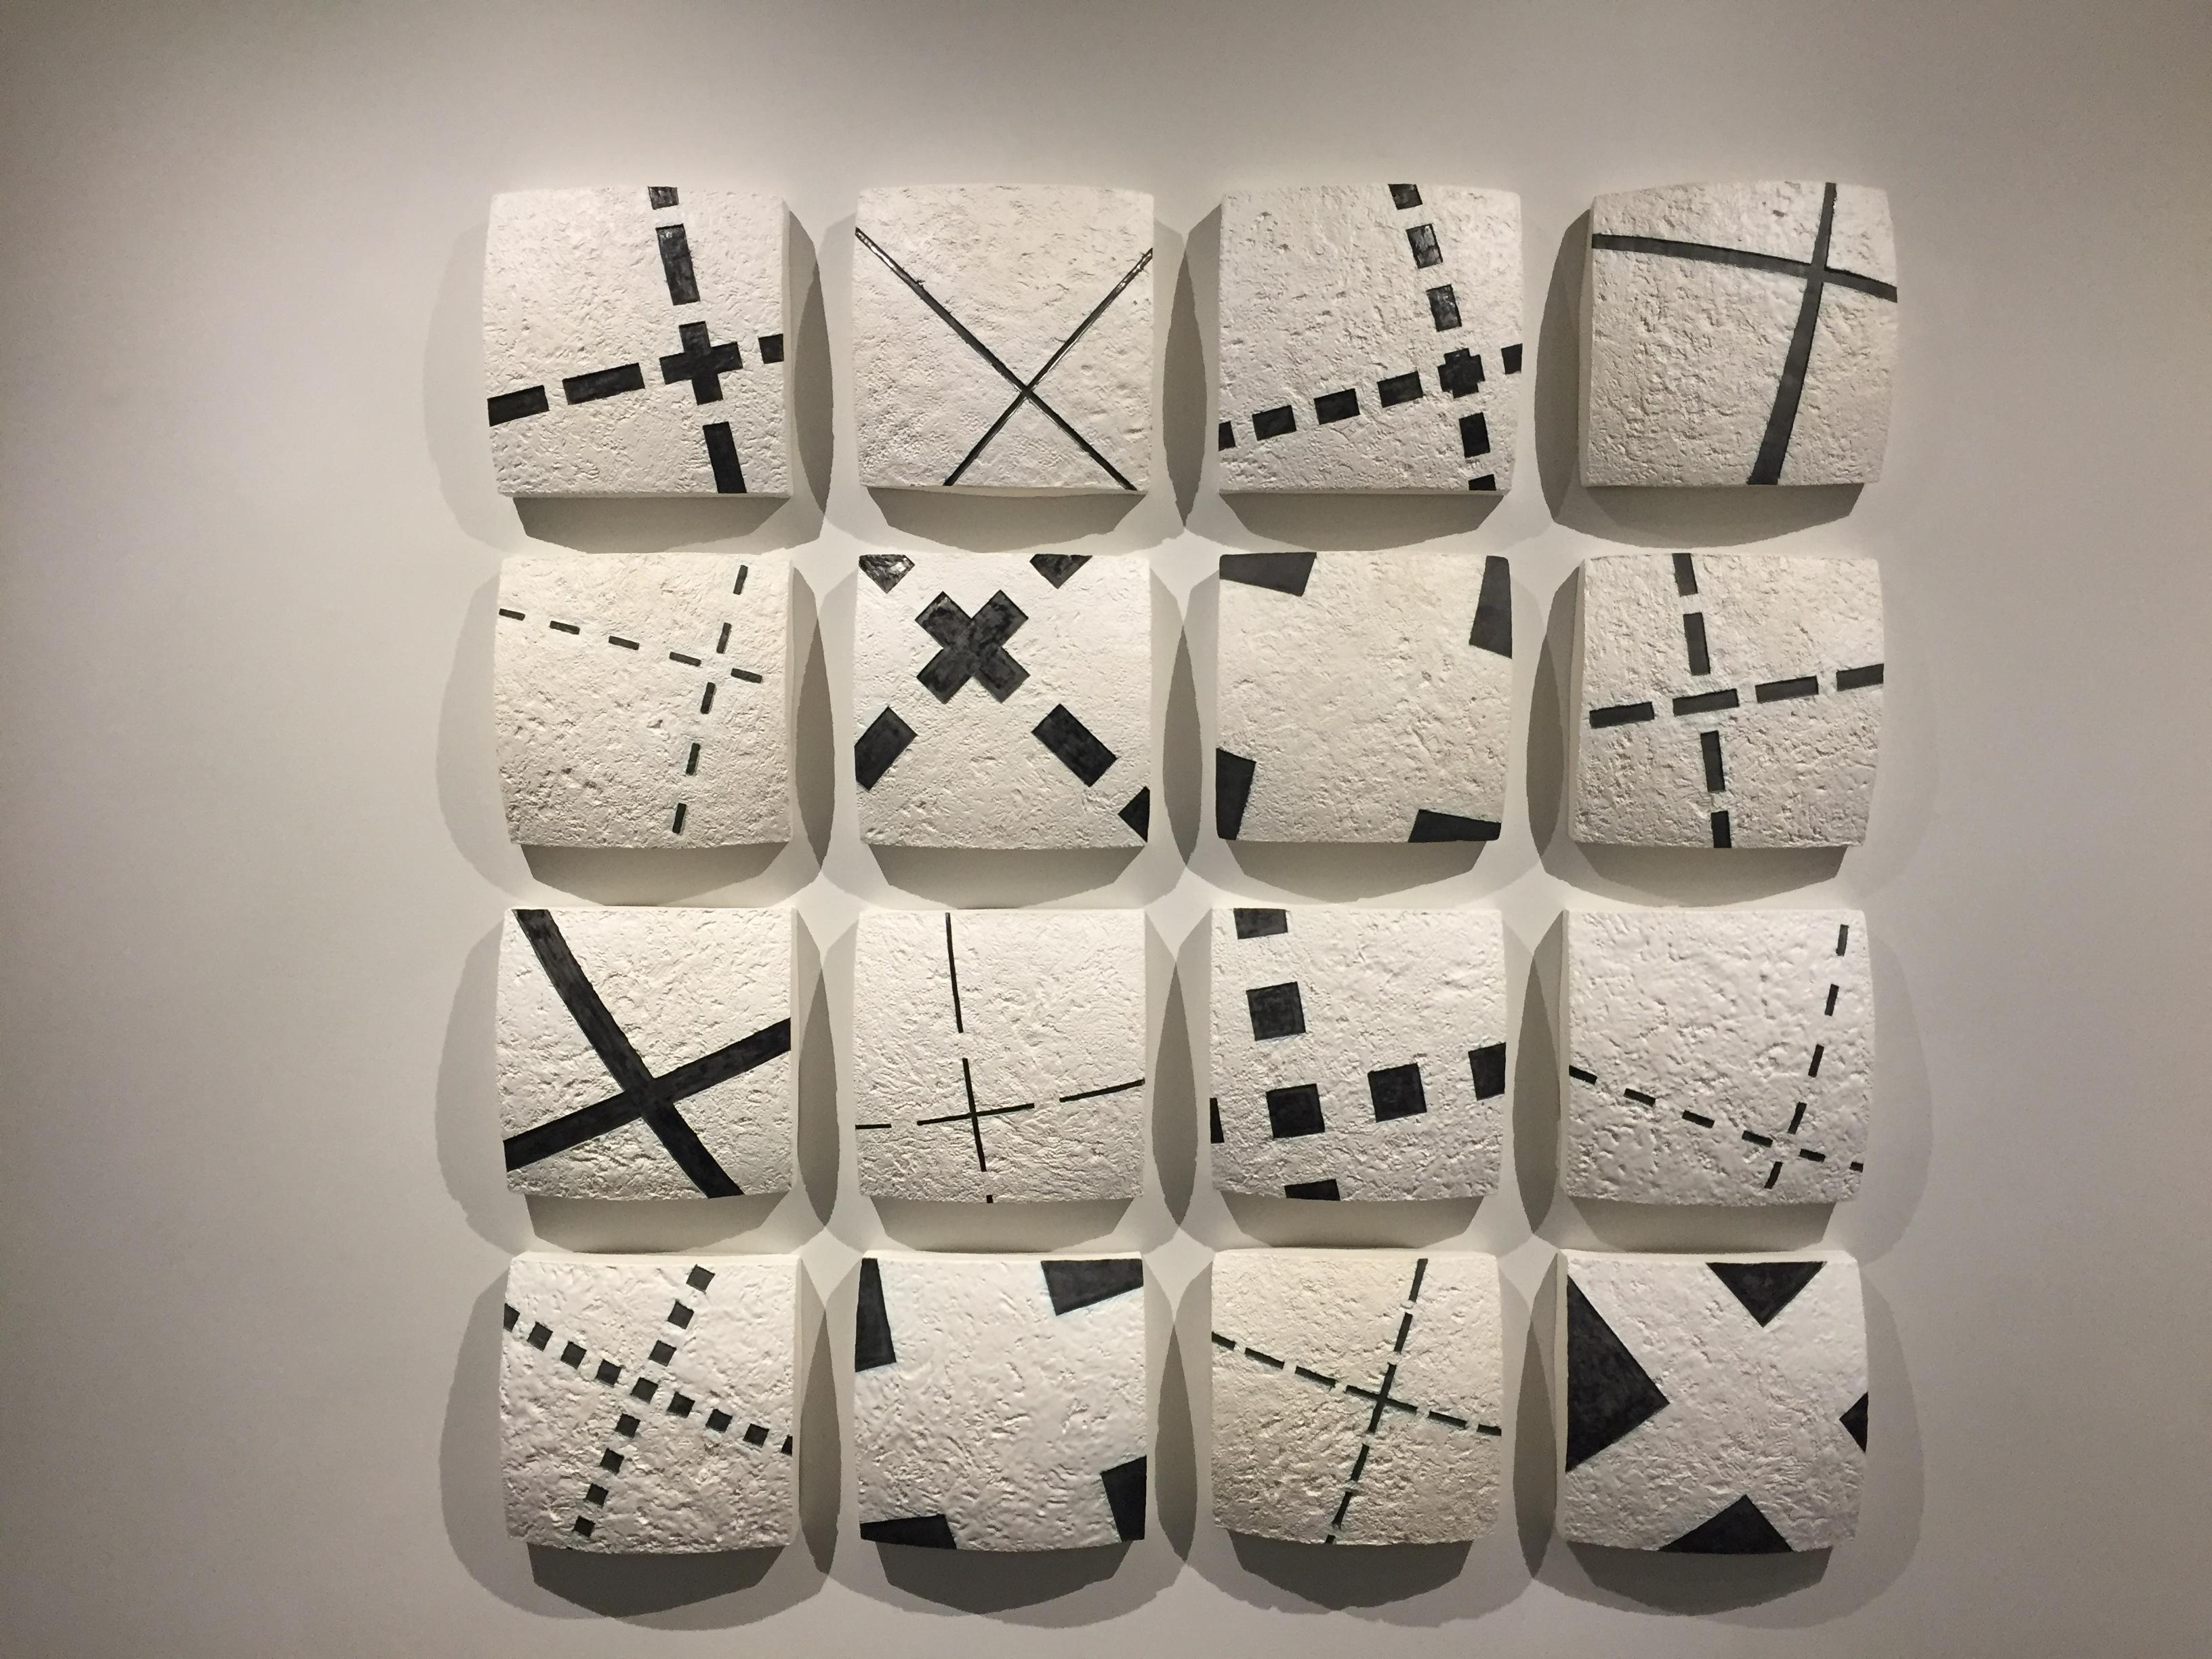 As a self-proclaimed topophiliac, Gregor Turk is known for ceramic sculptures, photography, mixed-media constructions and various public art installations, with the most recent at the Metropolitan Library in Atlanta, Georgia. Turk focuses on the